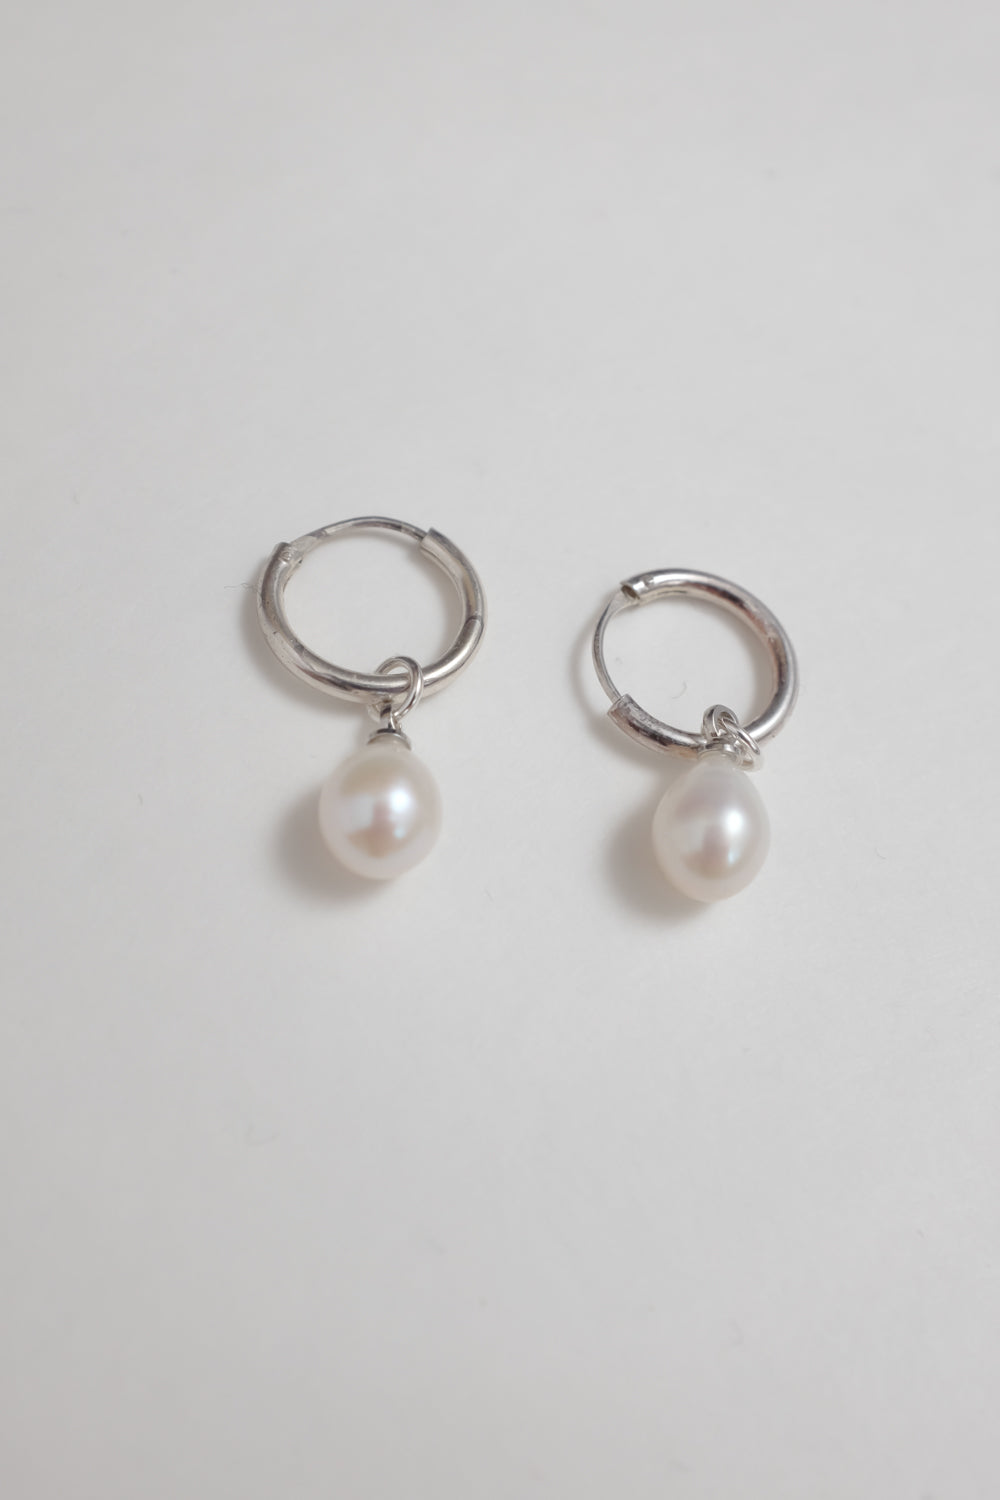 SMALL SILVER 925 HOOPS WITH VINTAGE PEARLS